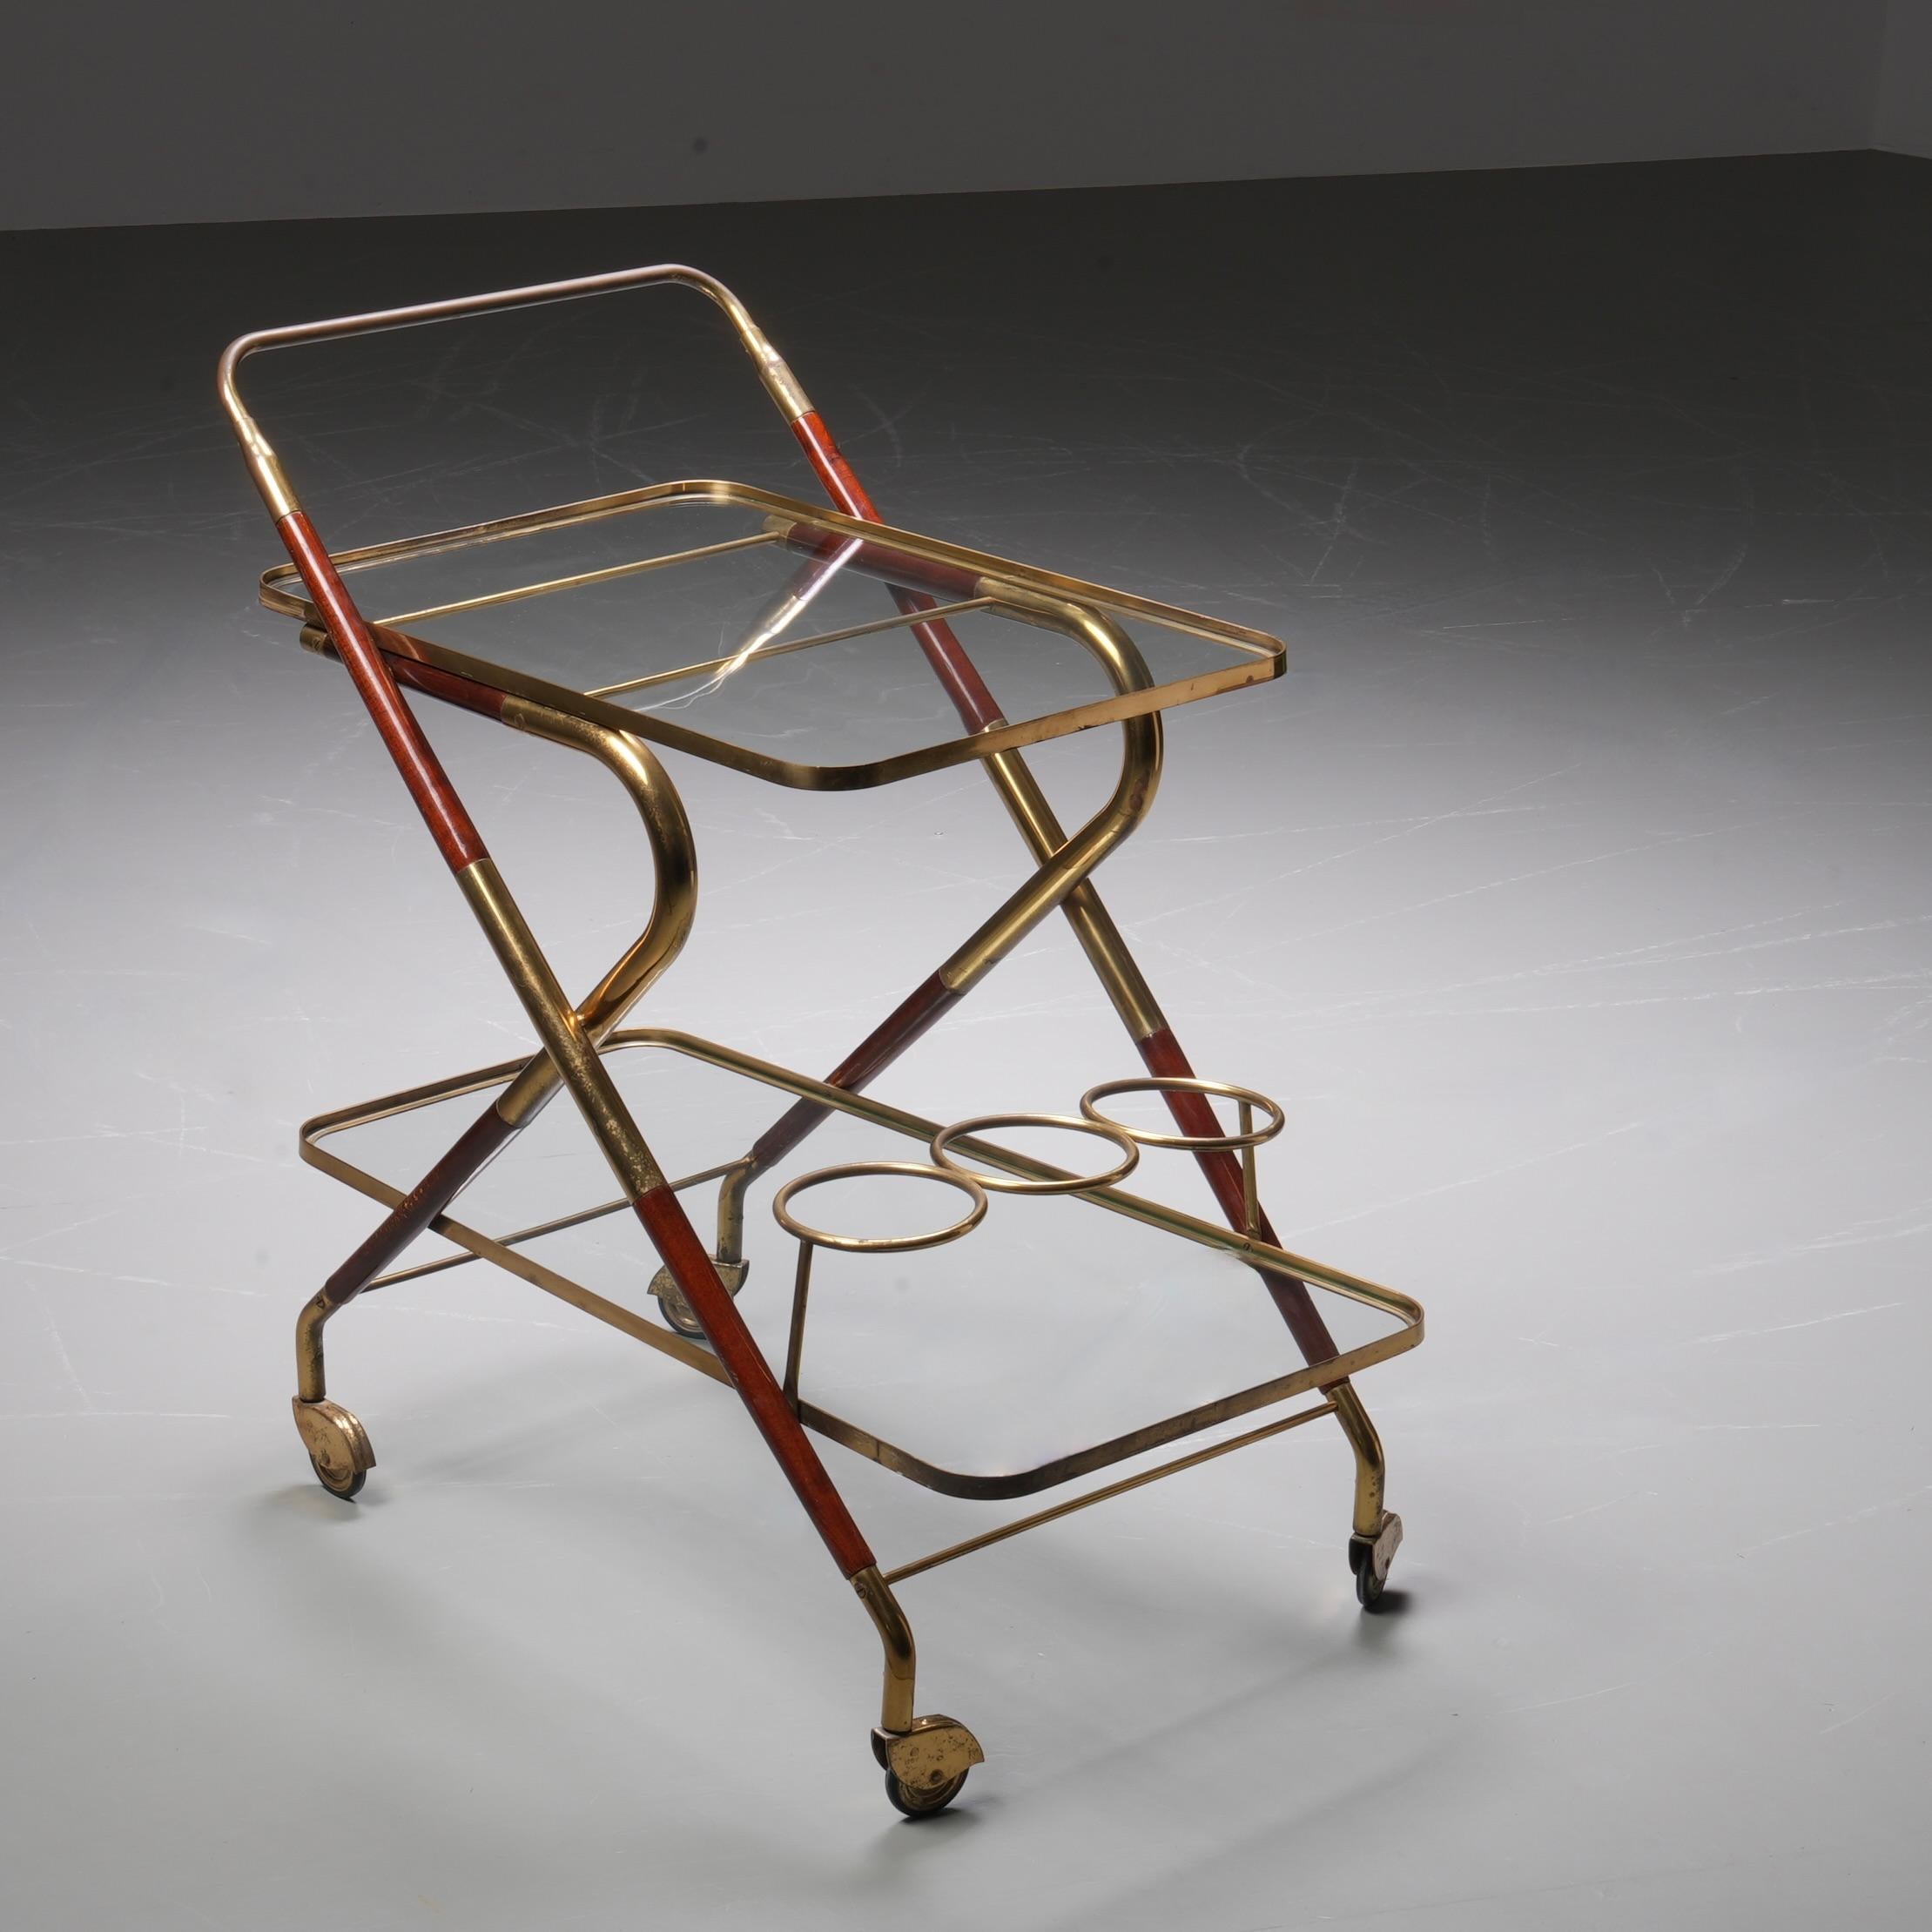 Grappa Trolley by Cesare Lacca in Glass, Brass and Metal. Italy, 1950’s For Sale 1